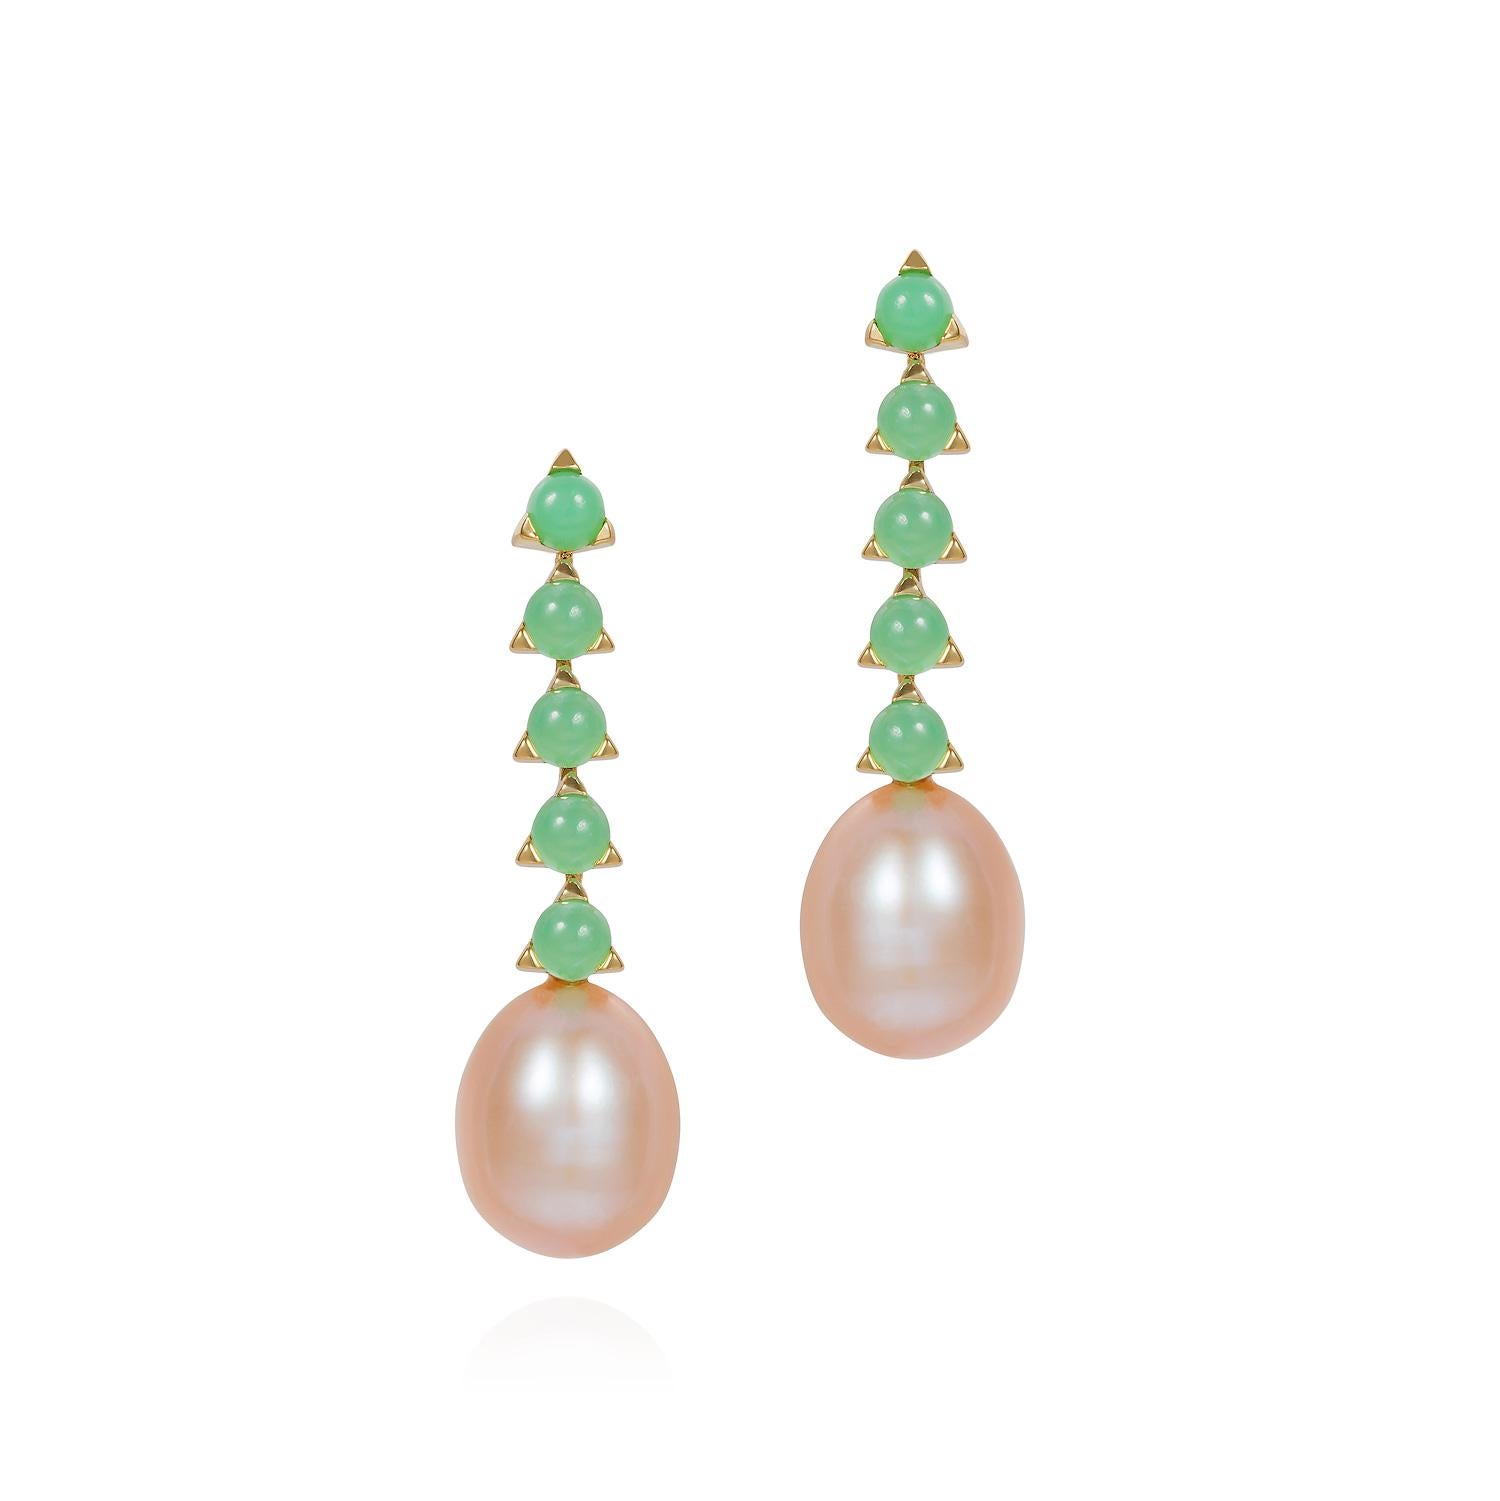 MAVIADA's five stone 3mm round smooth cabochon stones, 8x12mm light peach, light violet coloured baroque pearl 18k yellow gold earrings, come in multiple fabulous colours. Each baroque pearl is unique and the colours may vary between light peach and